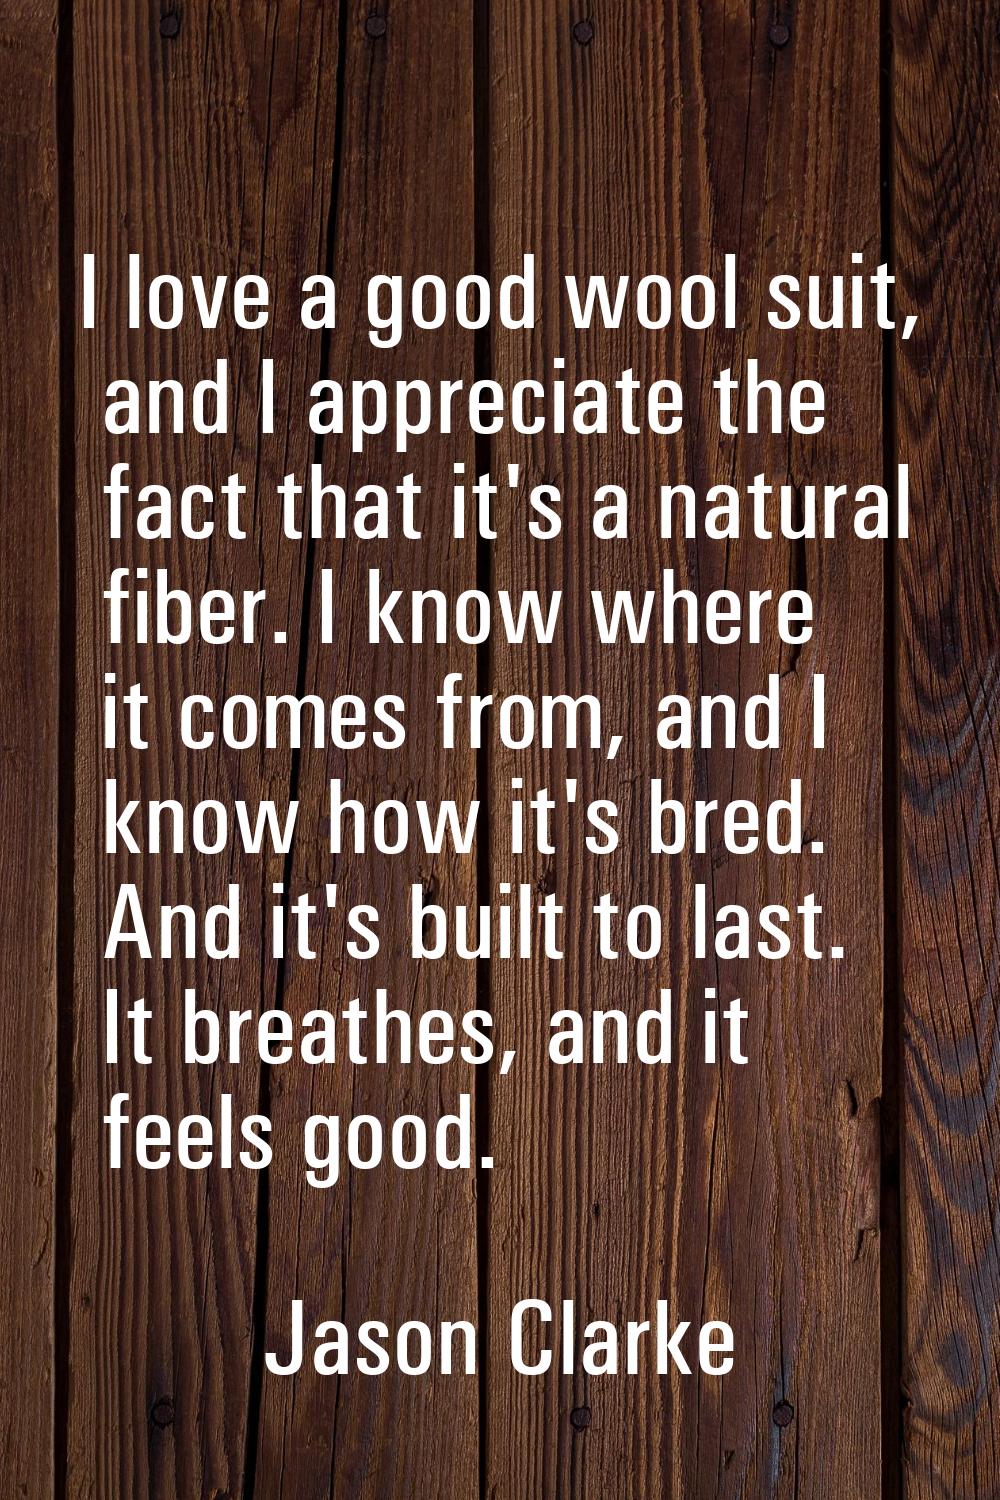 I love a good wool suit, and I appreciate the fact that it's a natural fiber. I know where it comes